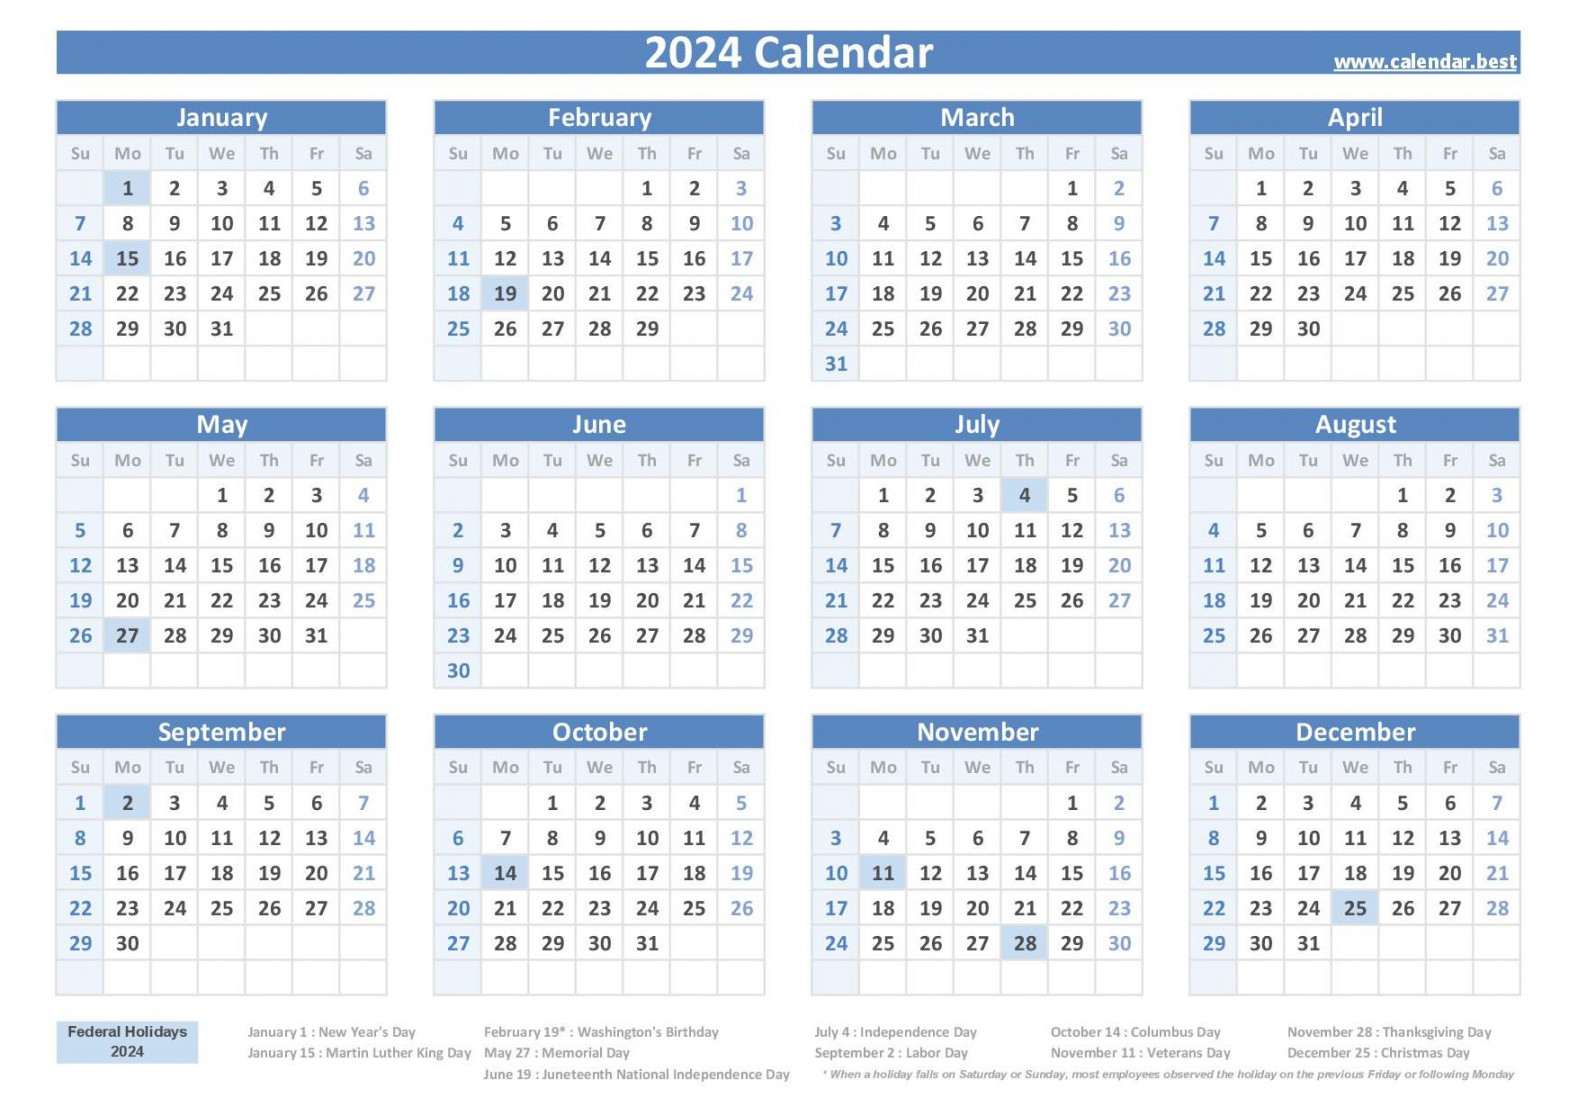 Federal Holidays : list and calendar with holidays to print